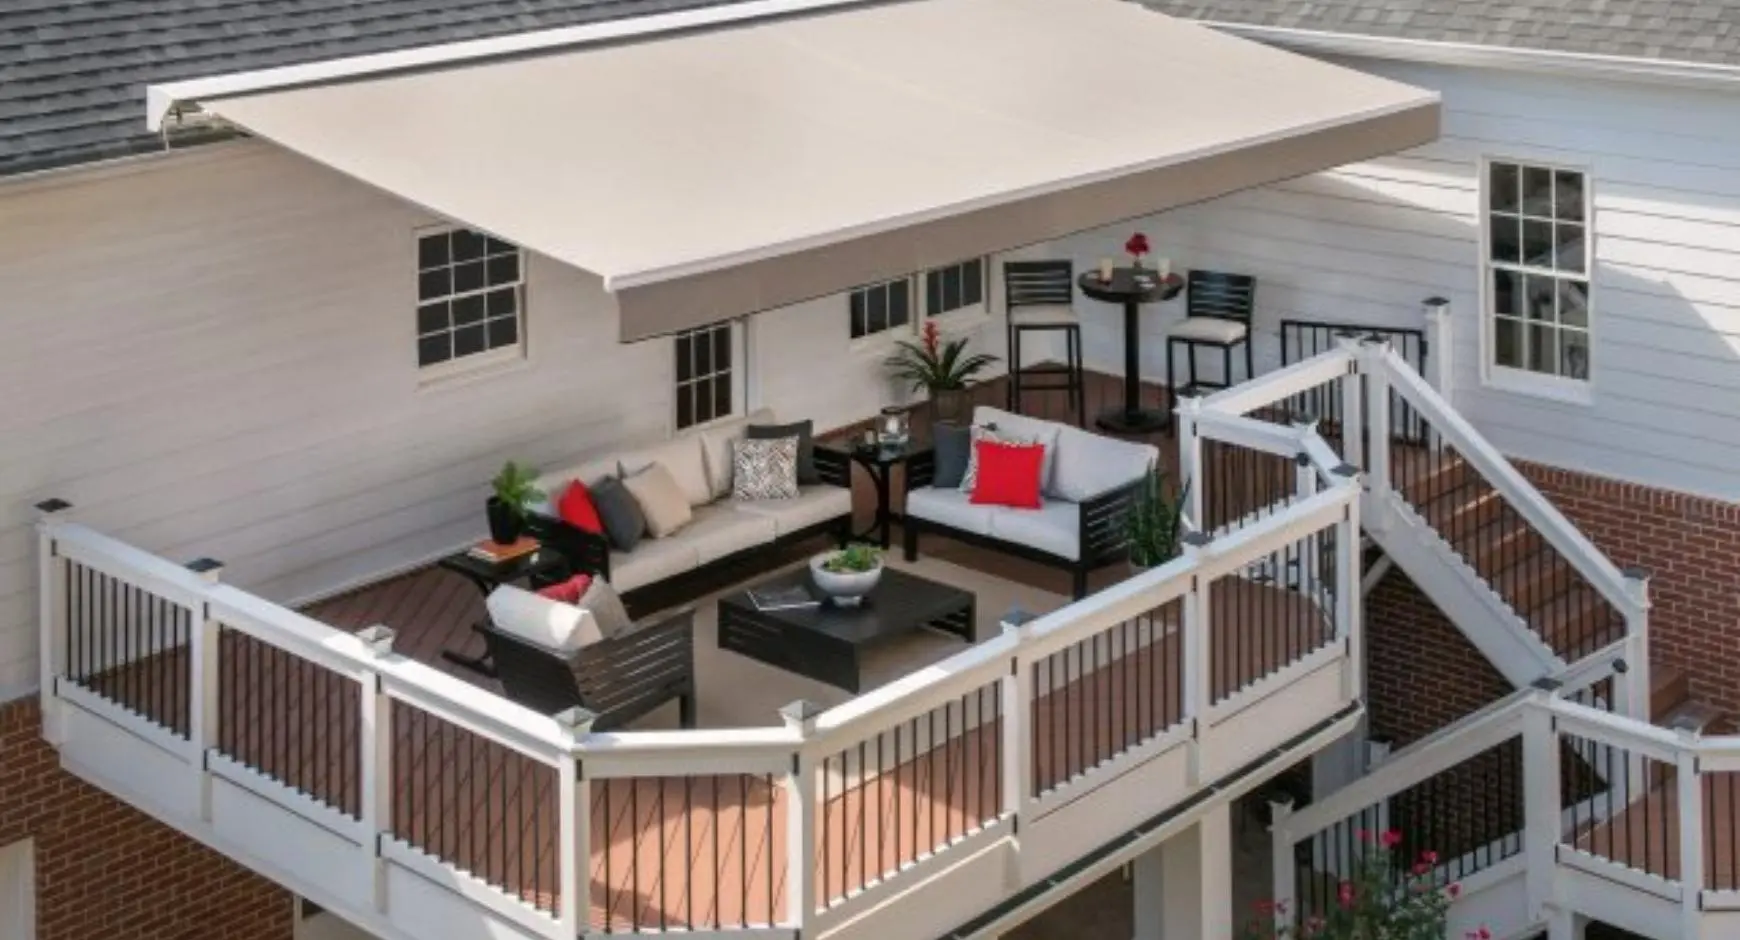 Enhancing Outdoor Living: Affordable Motorized Awnings for Decks